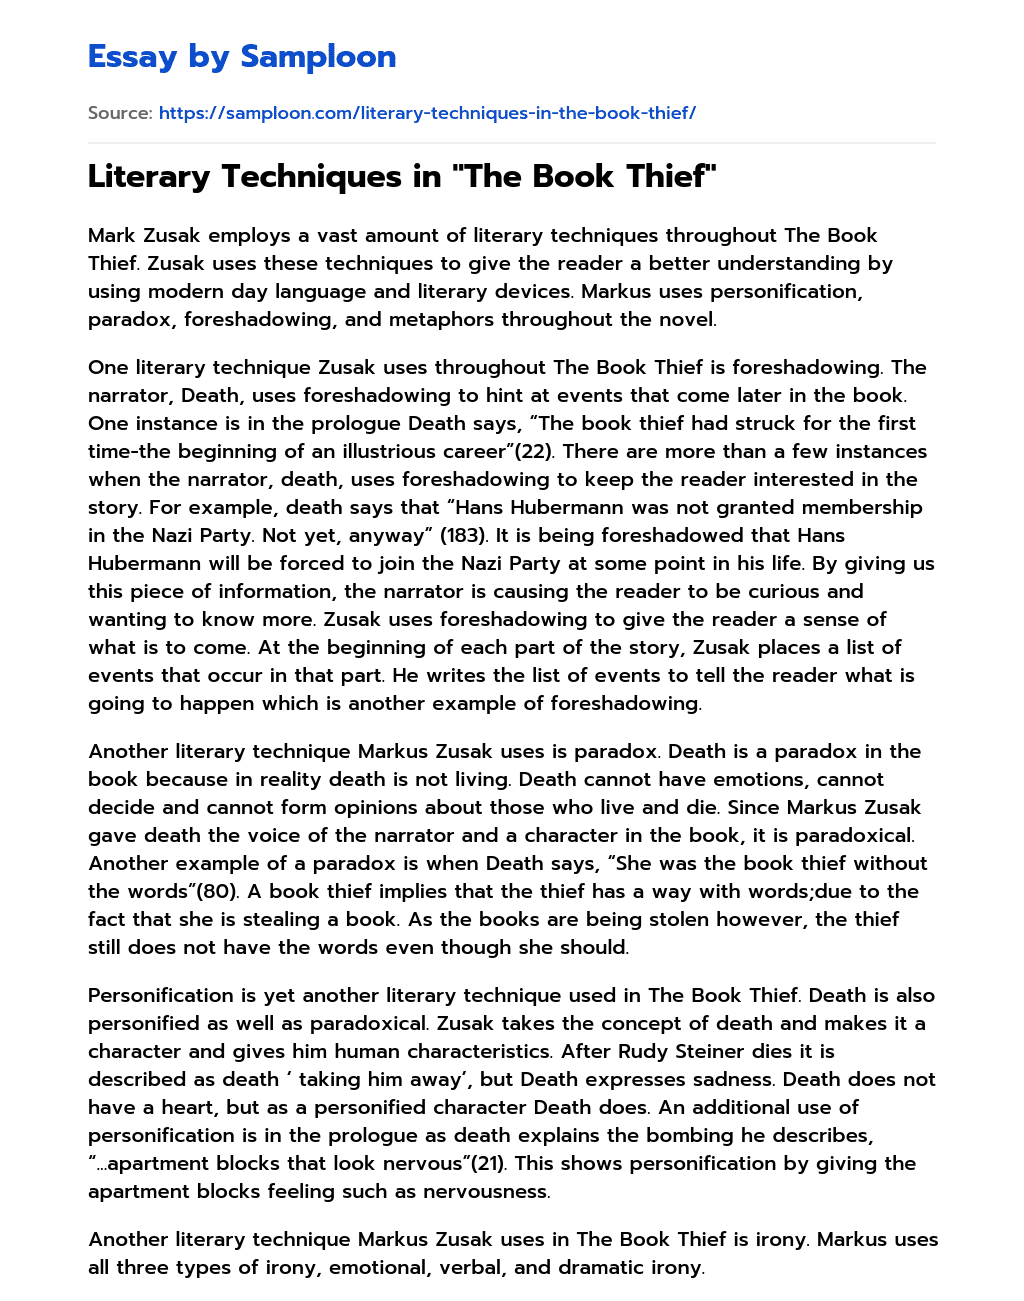 Literary Techniques in “The Book Thief” essay